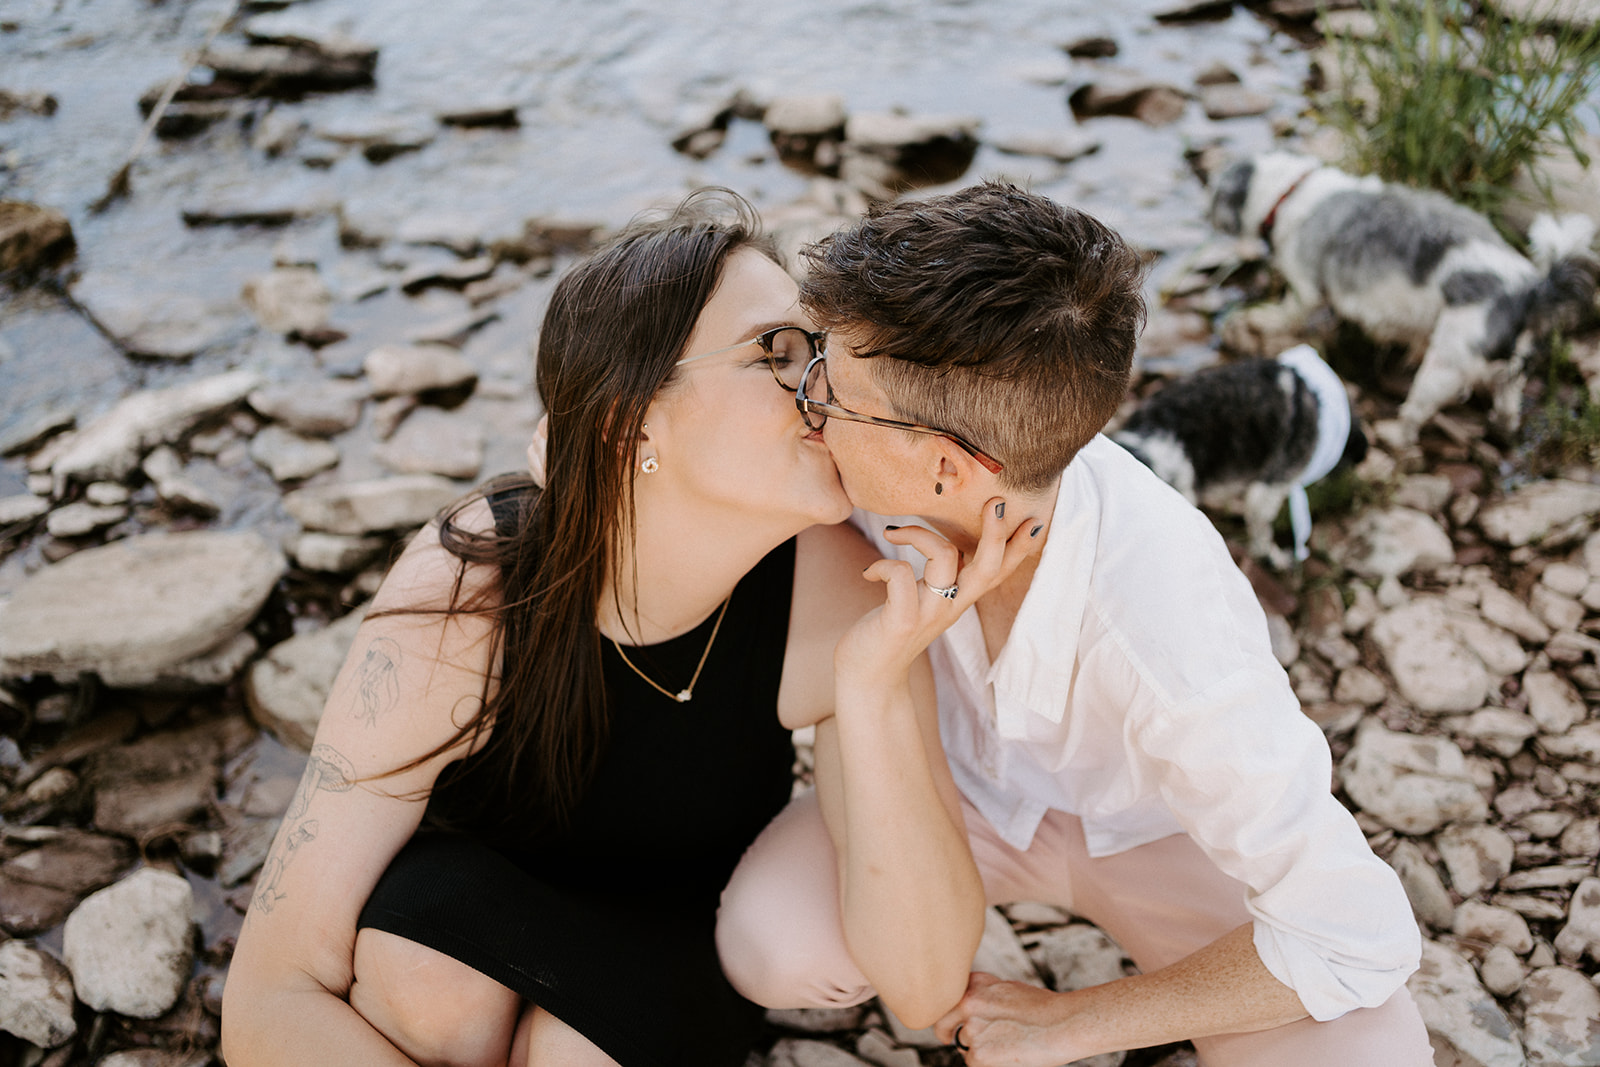 Two people sitting on rocks and kissing.